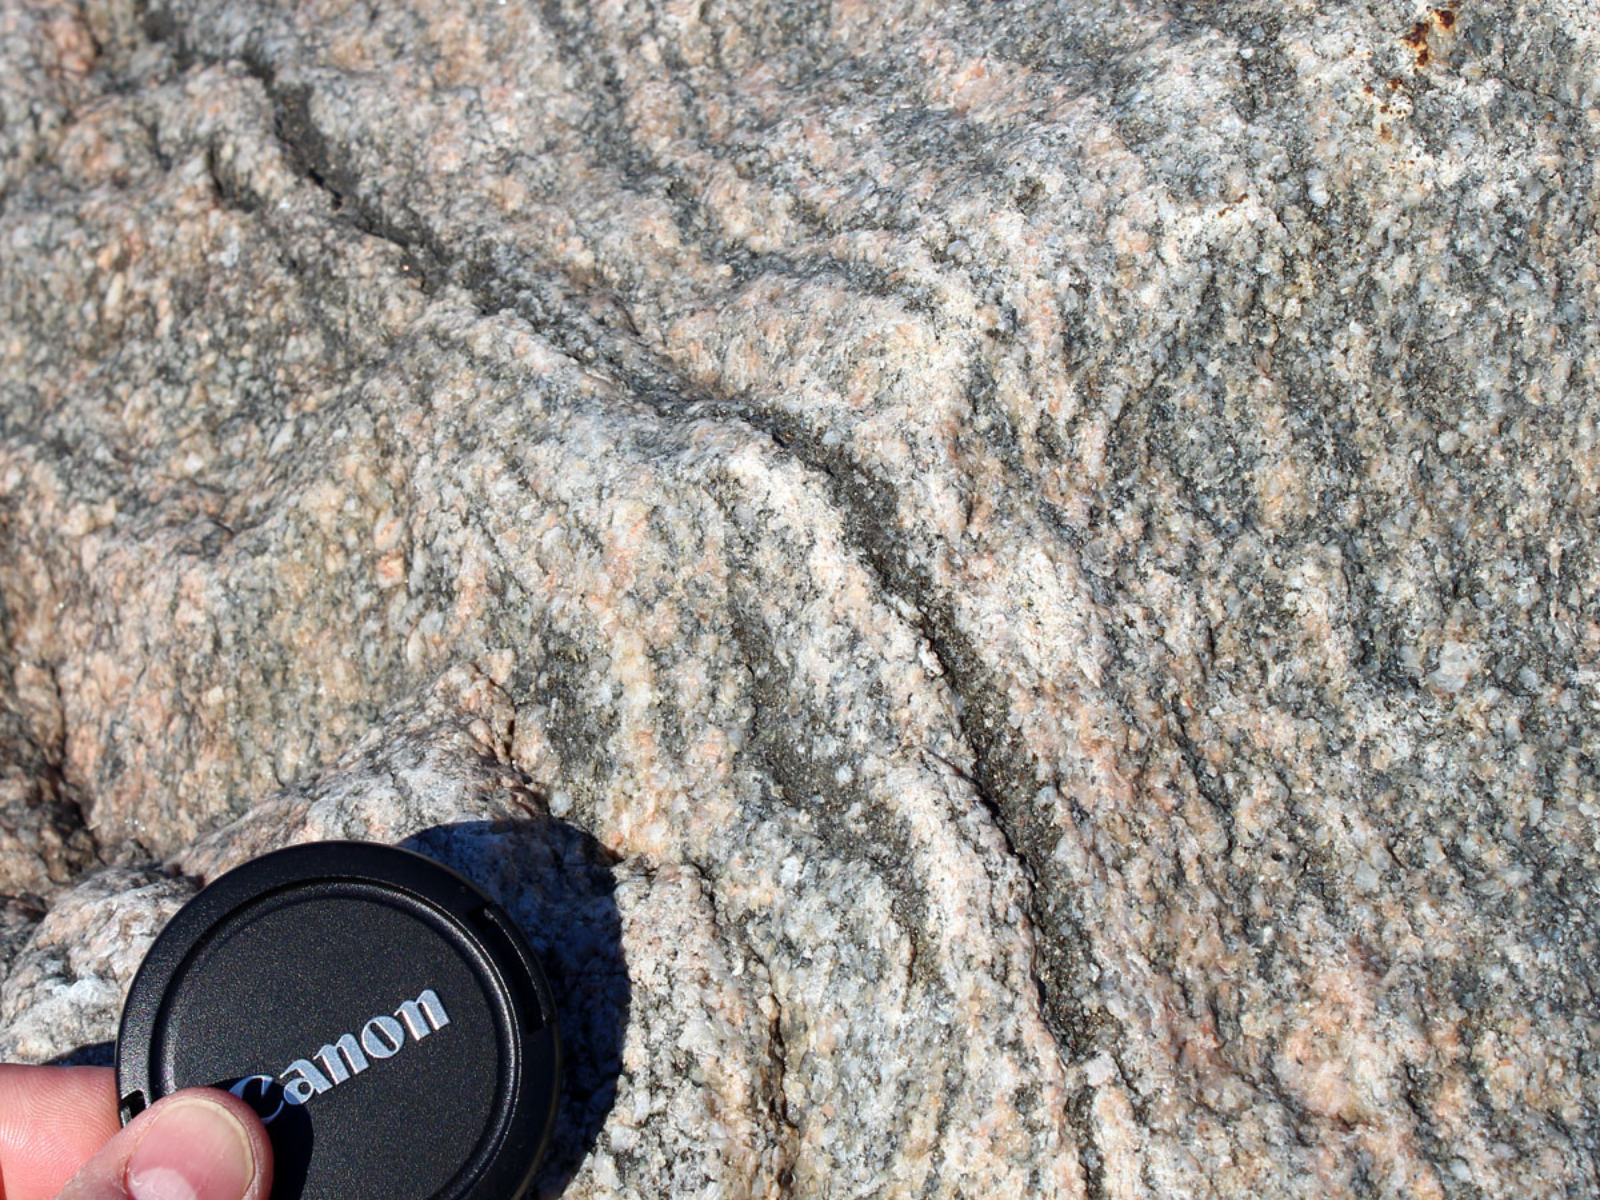 Close up on the detail and texture of a large mottled stone. In the bottom left corner a hand holds a lens cap into frame for scale.